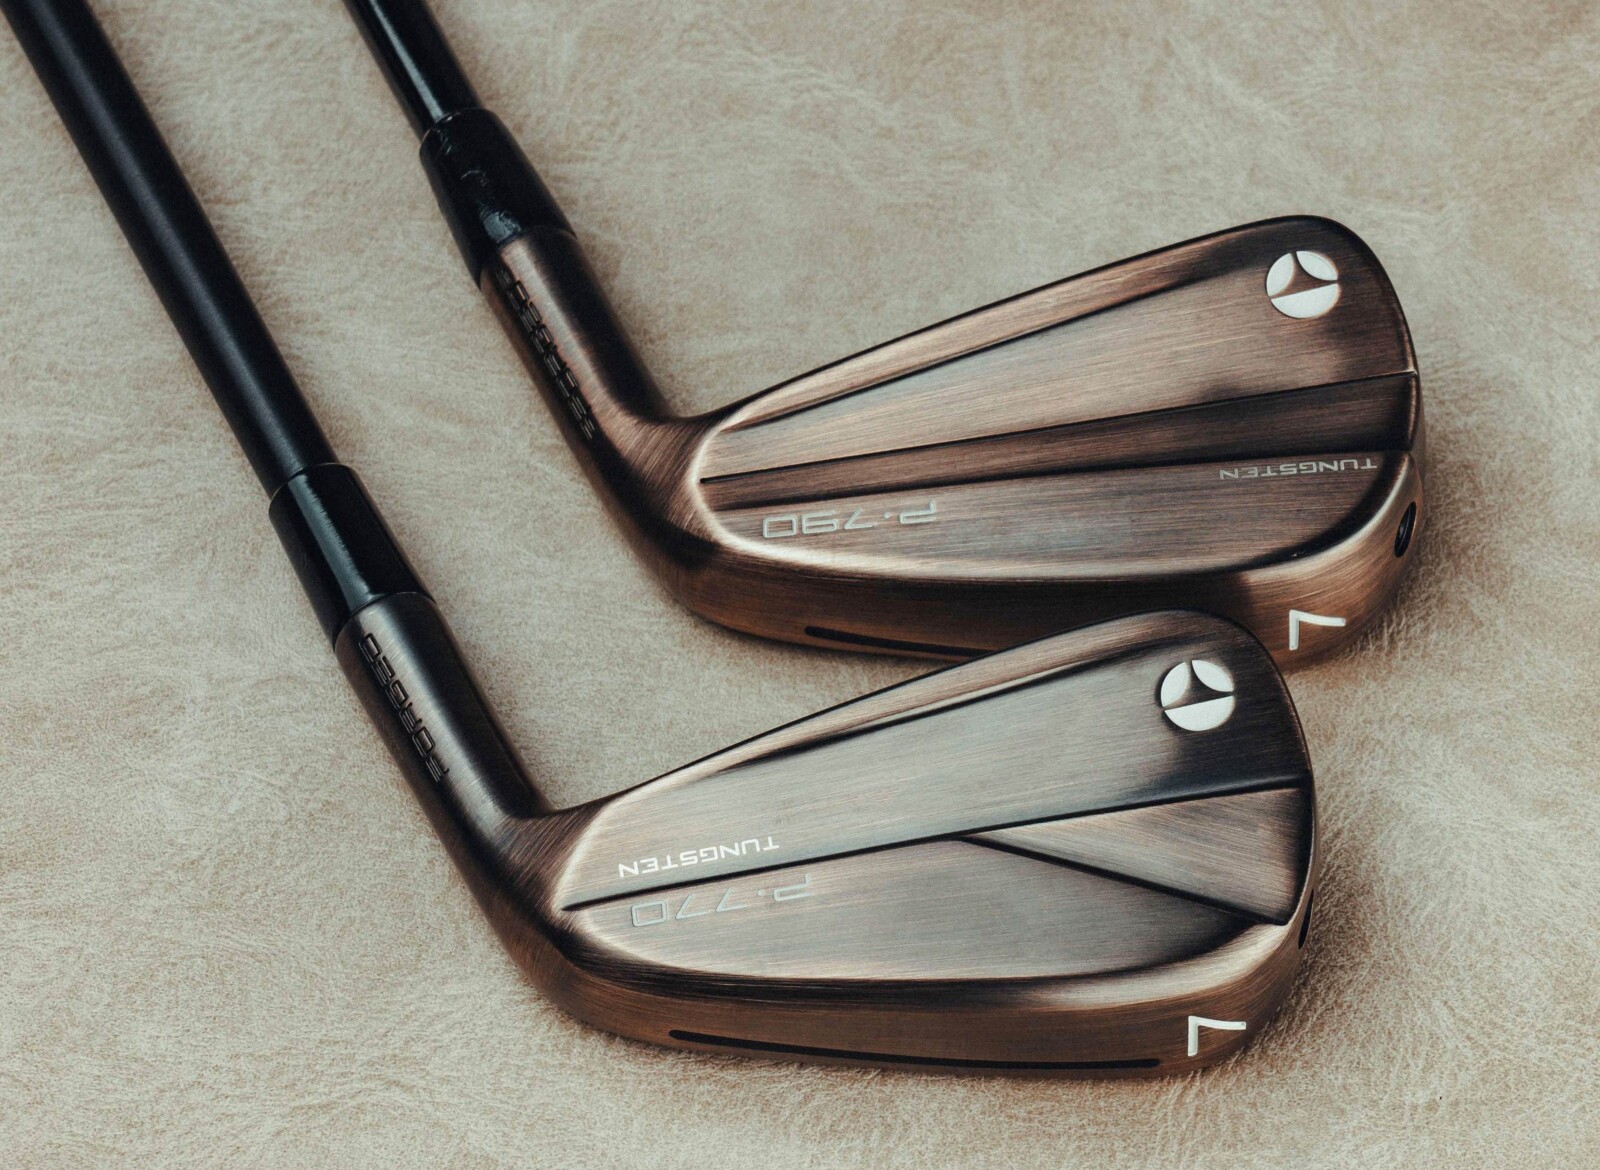 TaylorMade expands ‘Copper Club’ range